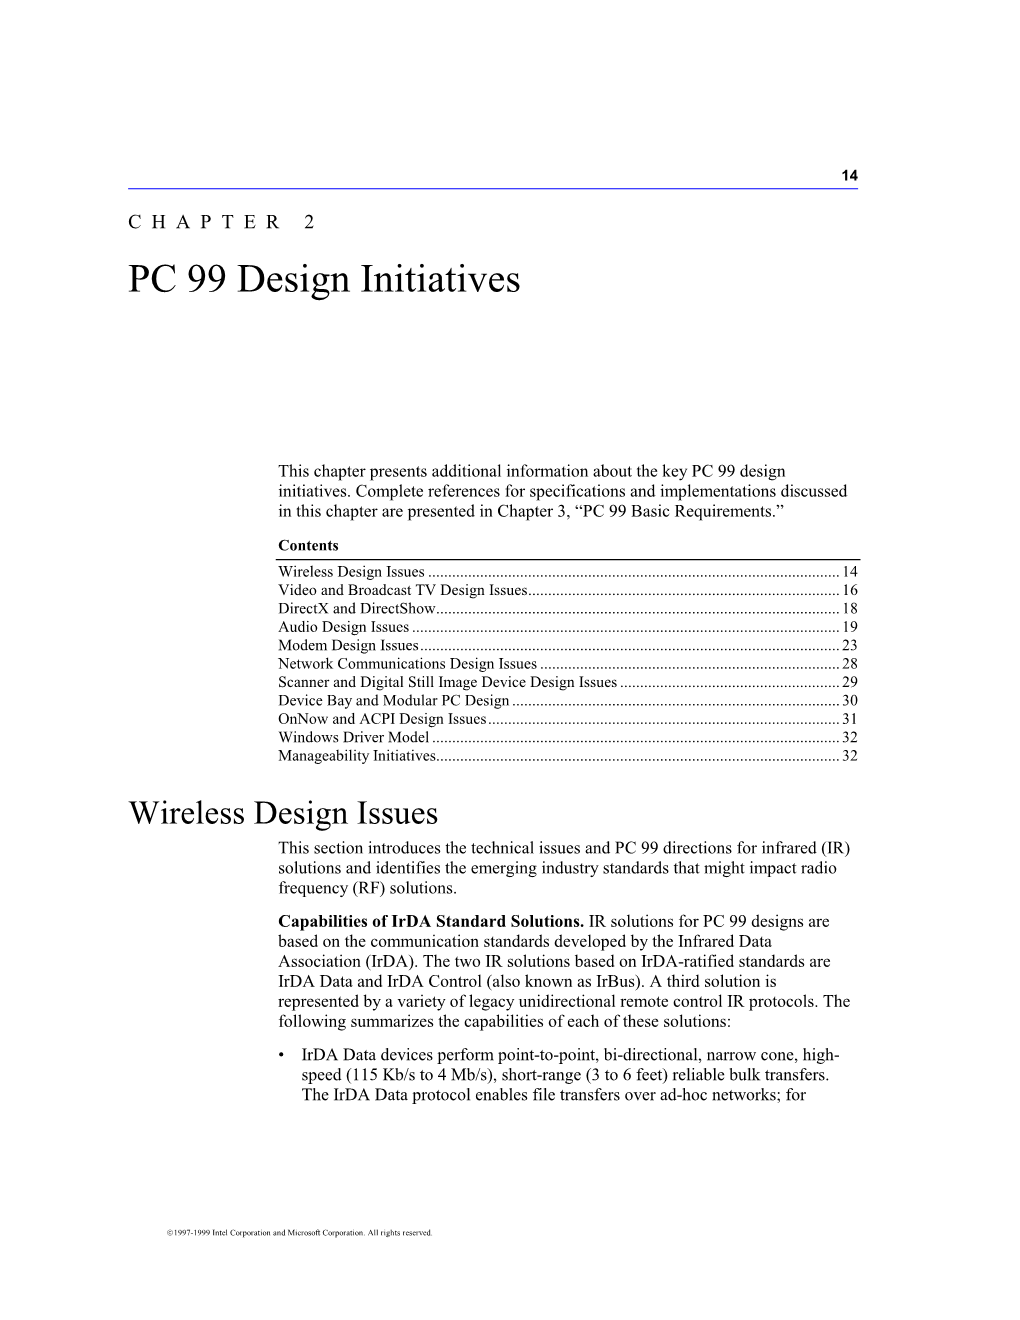 Chapter 2 PC 99 Design Initiatives 15